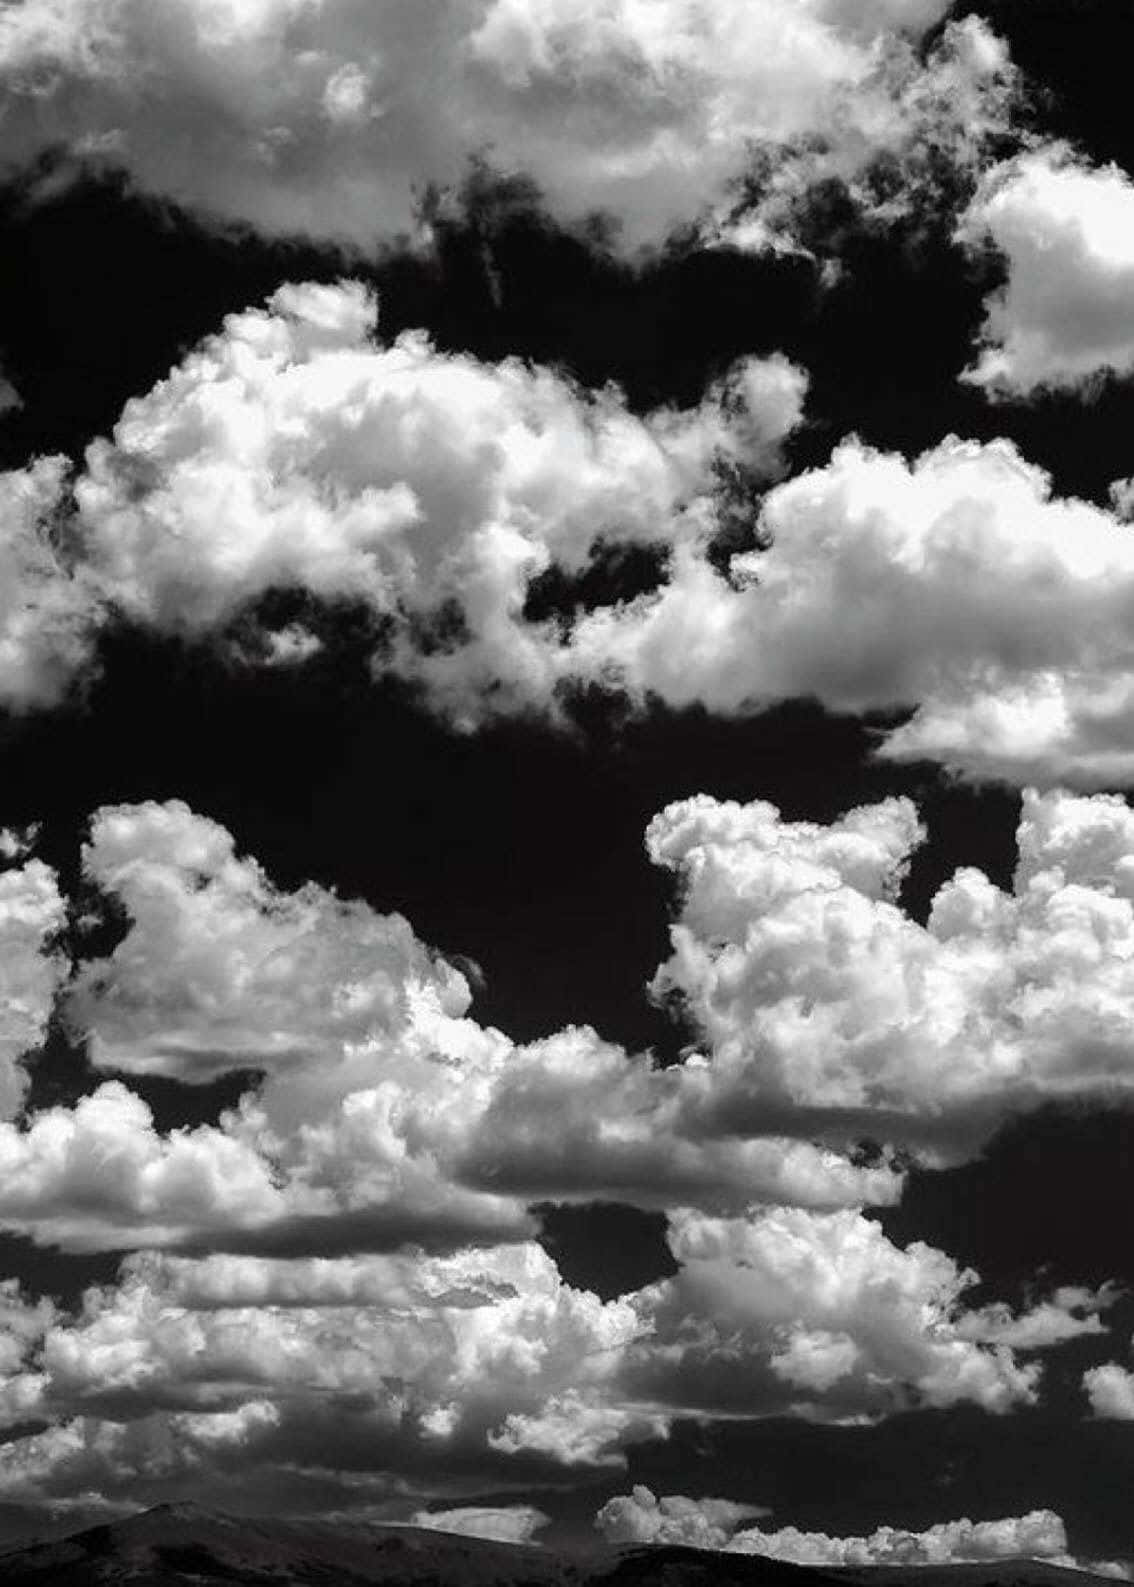 Enjoy the thunderstorm with the beautiful Black and White Clouds Wallpaper